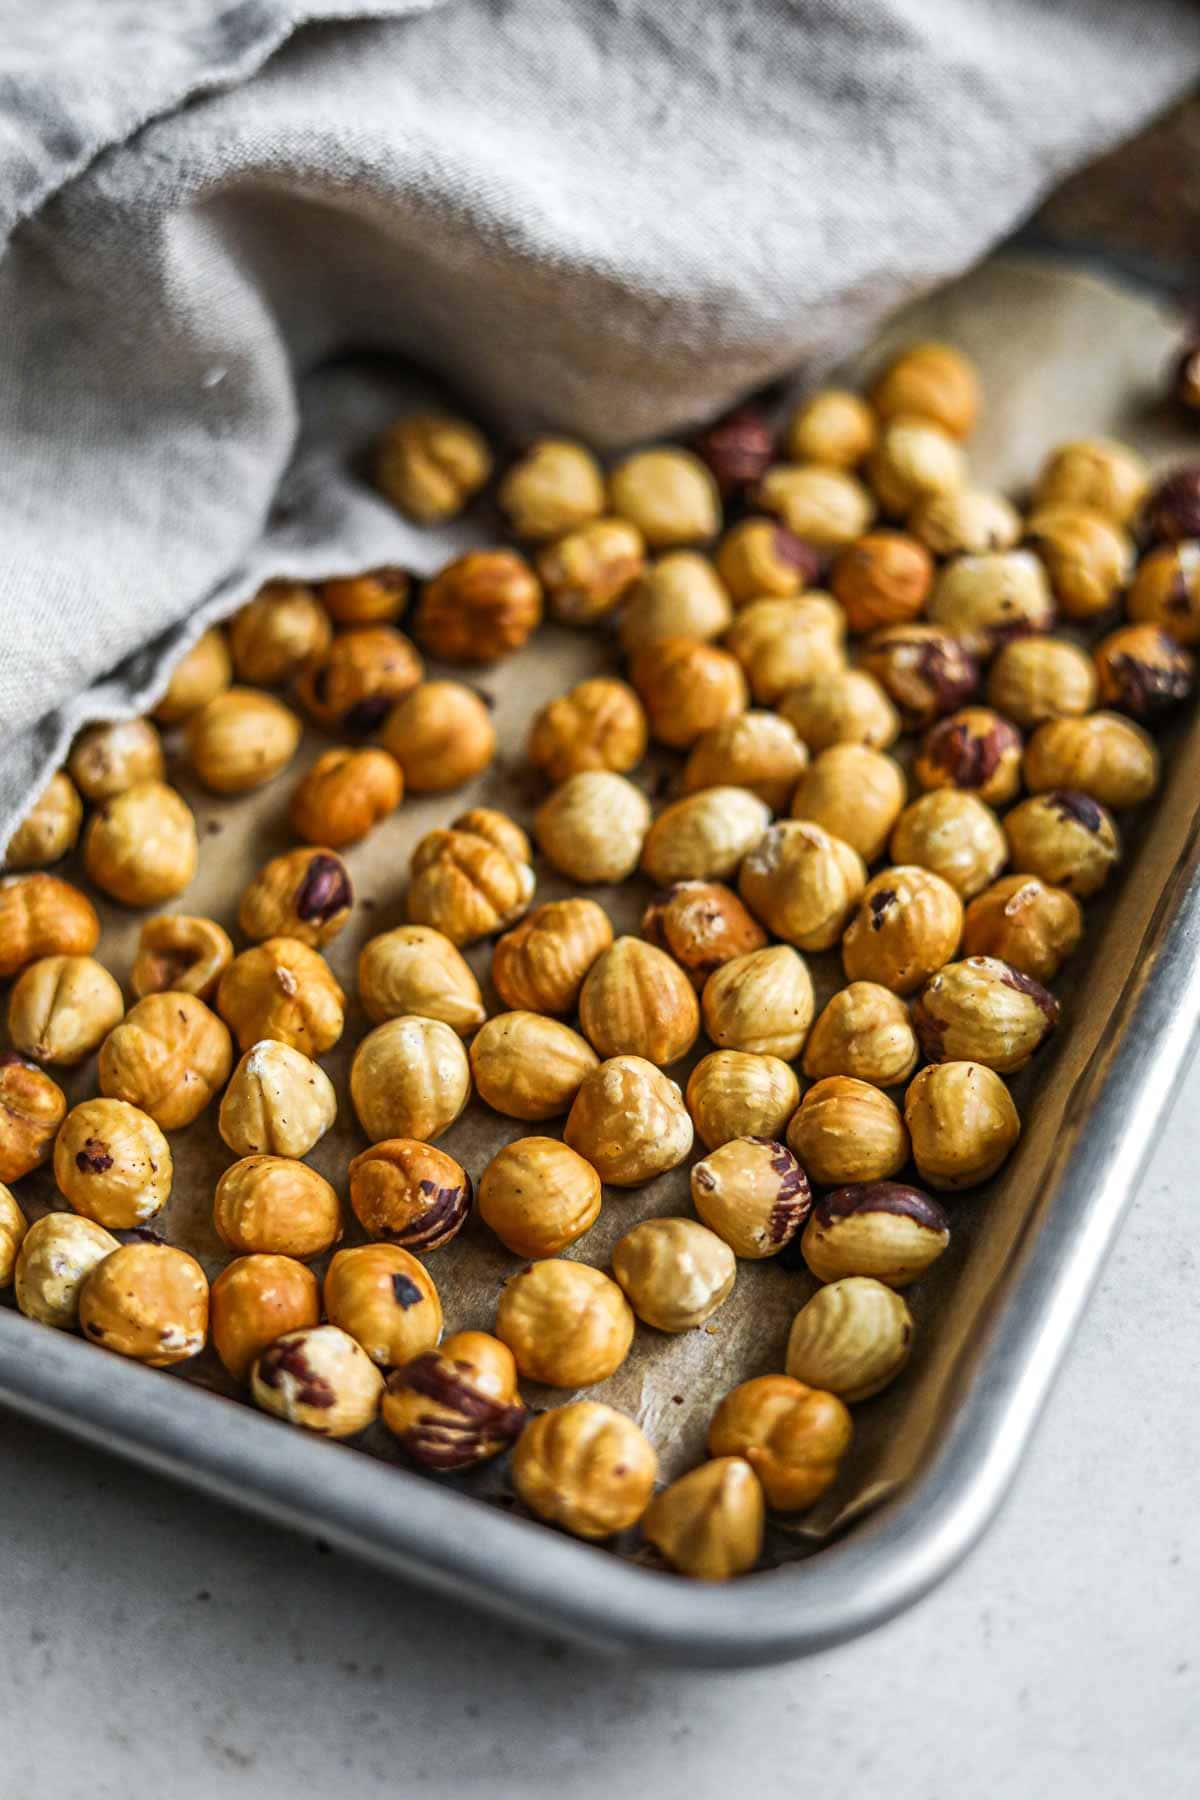 Roasted hazelnuts without the skin on a sheet pan.